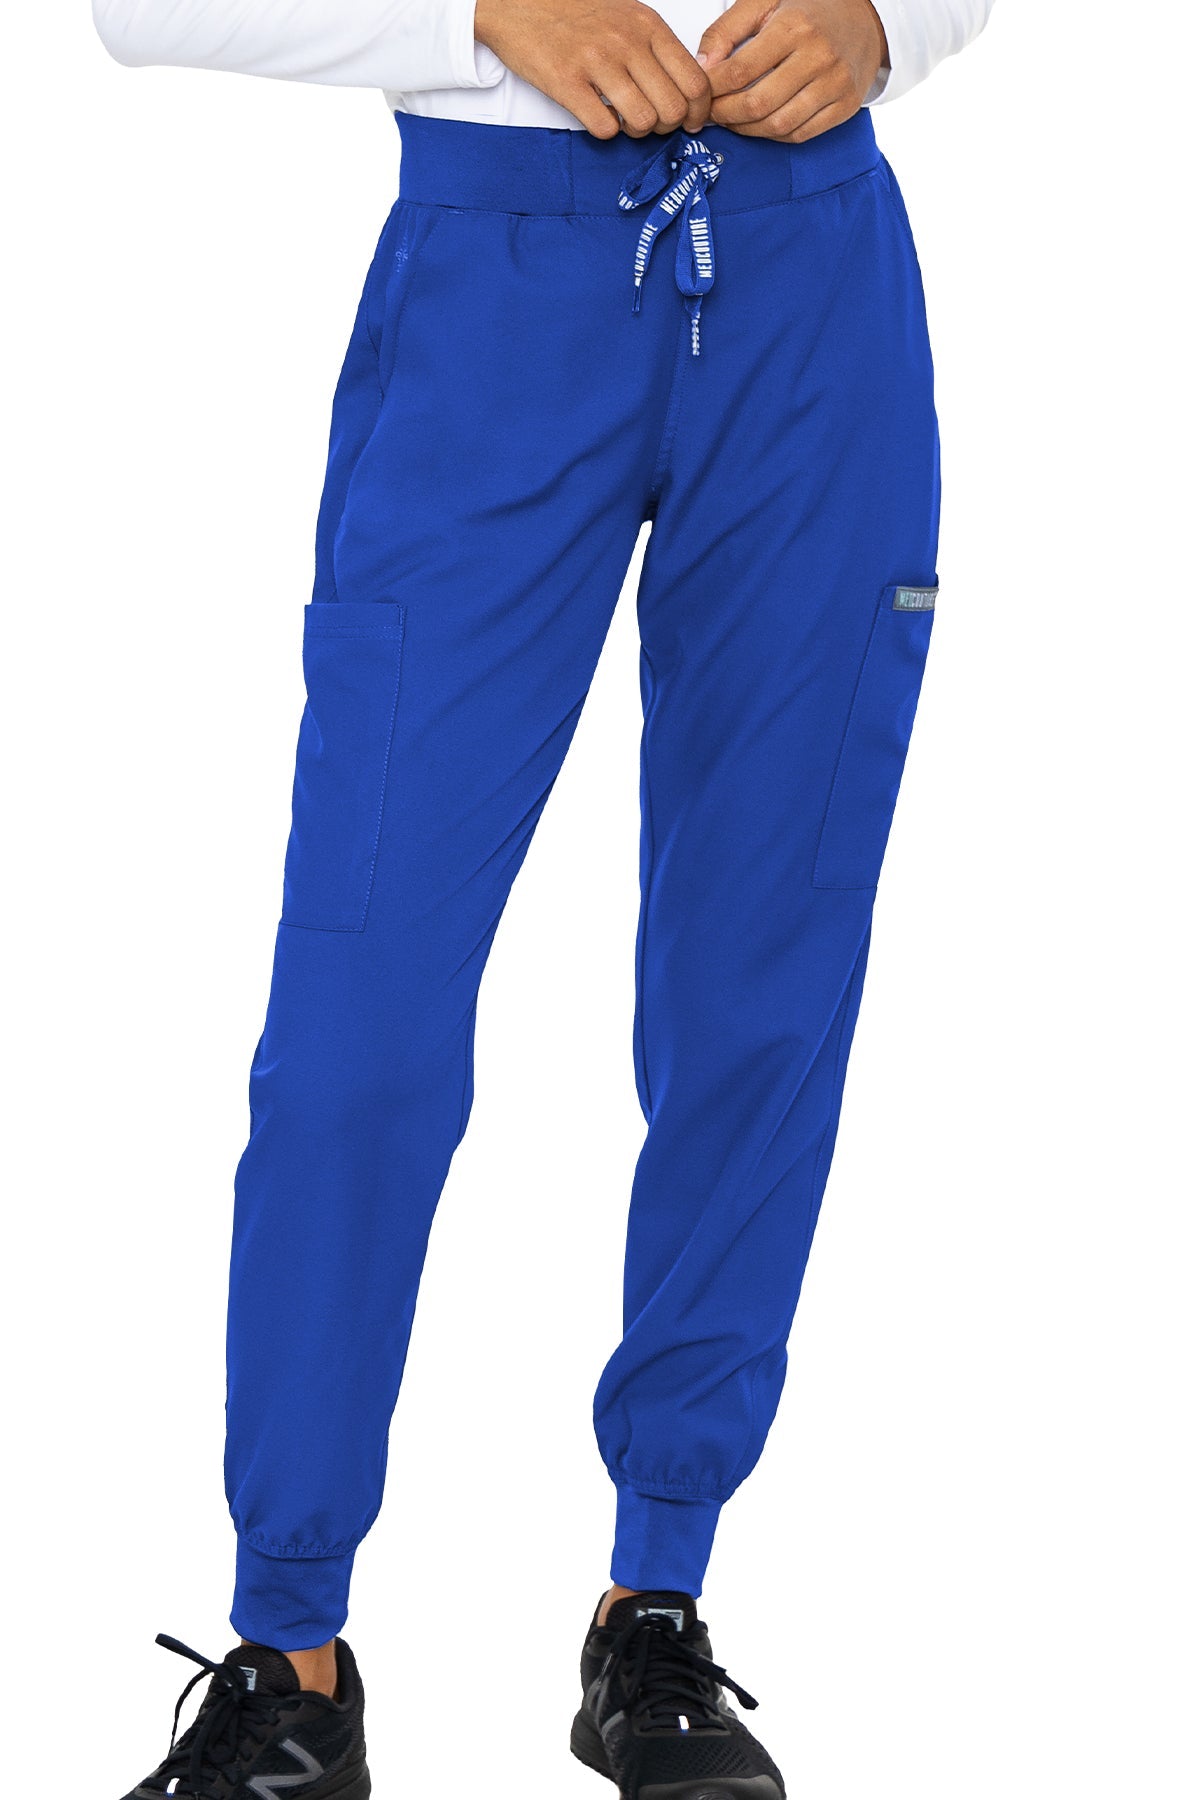 Med Couture Petite Scrub Pants Insight Jogger Pant in Royal at Parker's Clothing and Shoes.